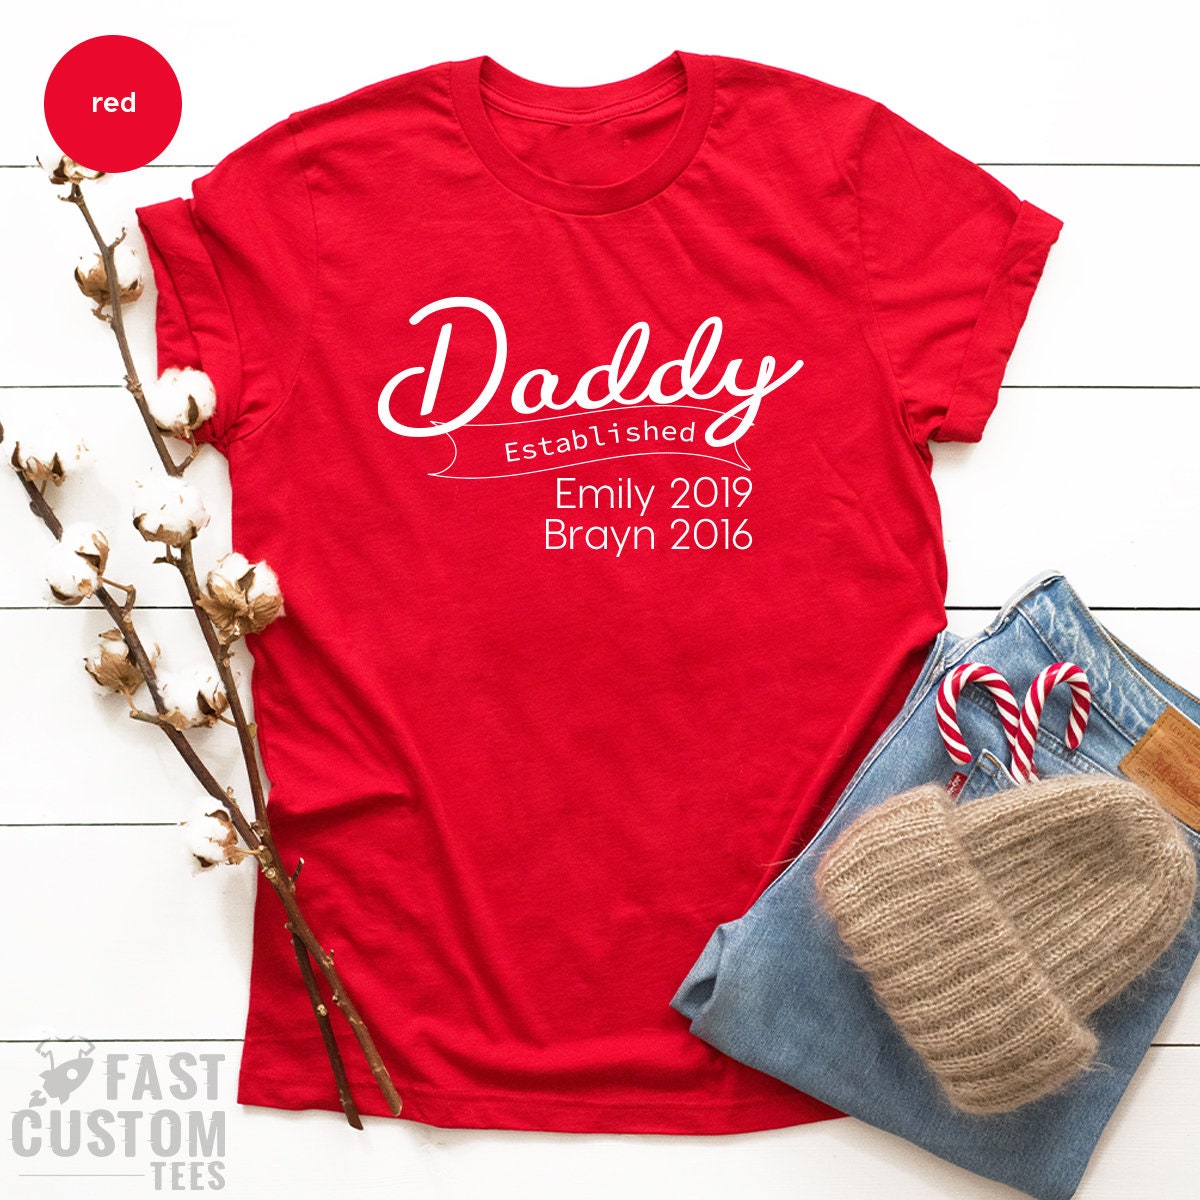 Favorite Dad Shirt, Dad Gifts, Gifts for Dad, Dad Birthday Gift, Dad to Be Shirt, Dad Shirt